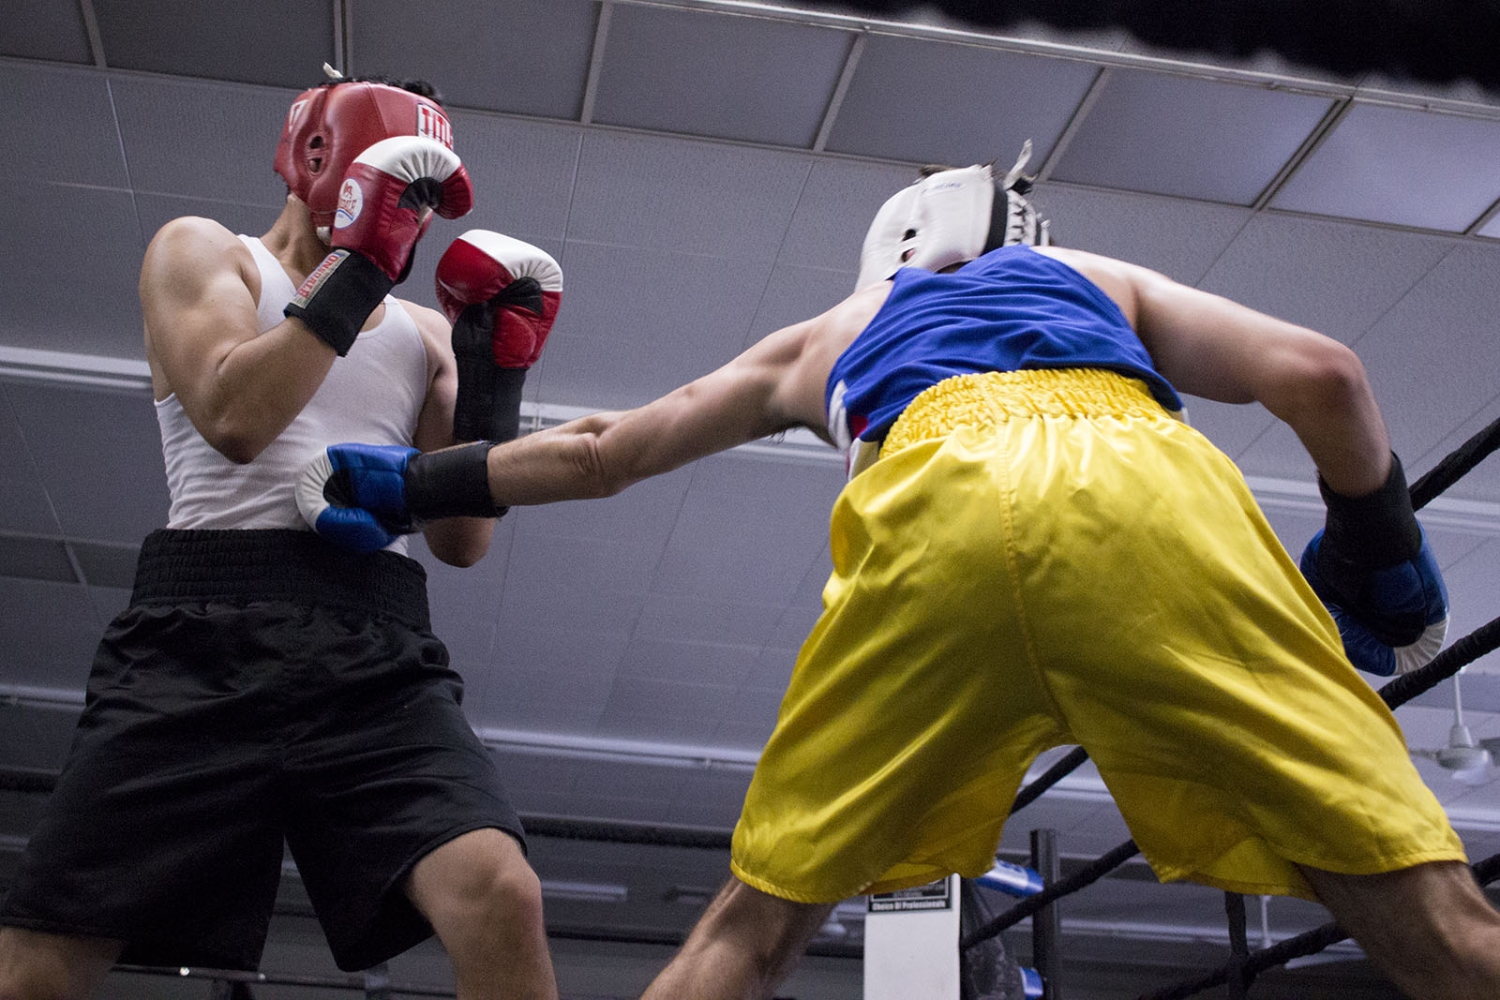 UCLA boxing at the 8th Annual Memorial Day Boxing Show - Daily Bruin